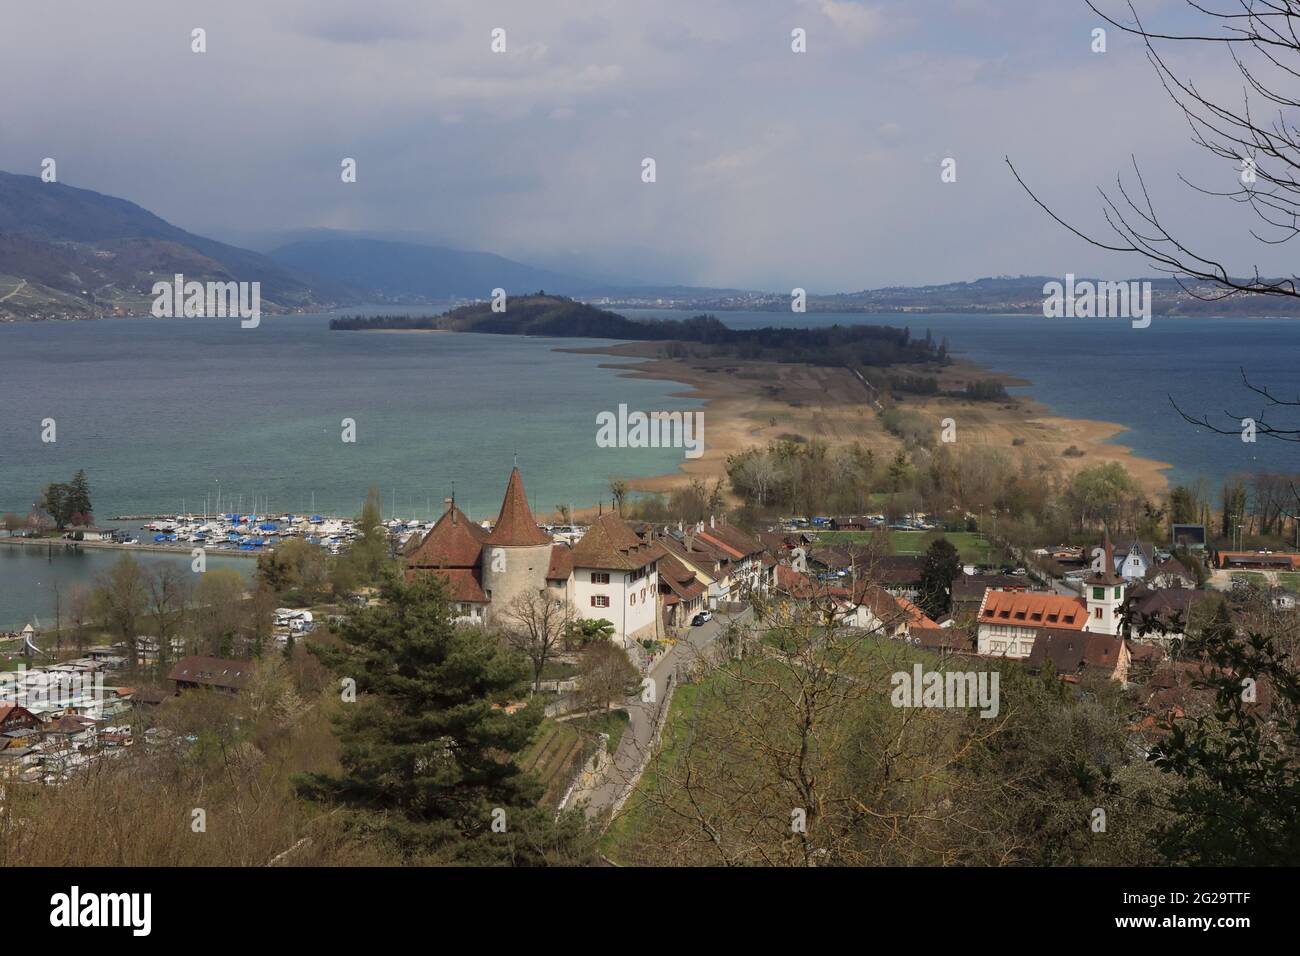 View from Jolimont to Erlach and Saint Peter's Island in the lake Biel. Stock Photo